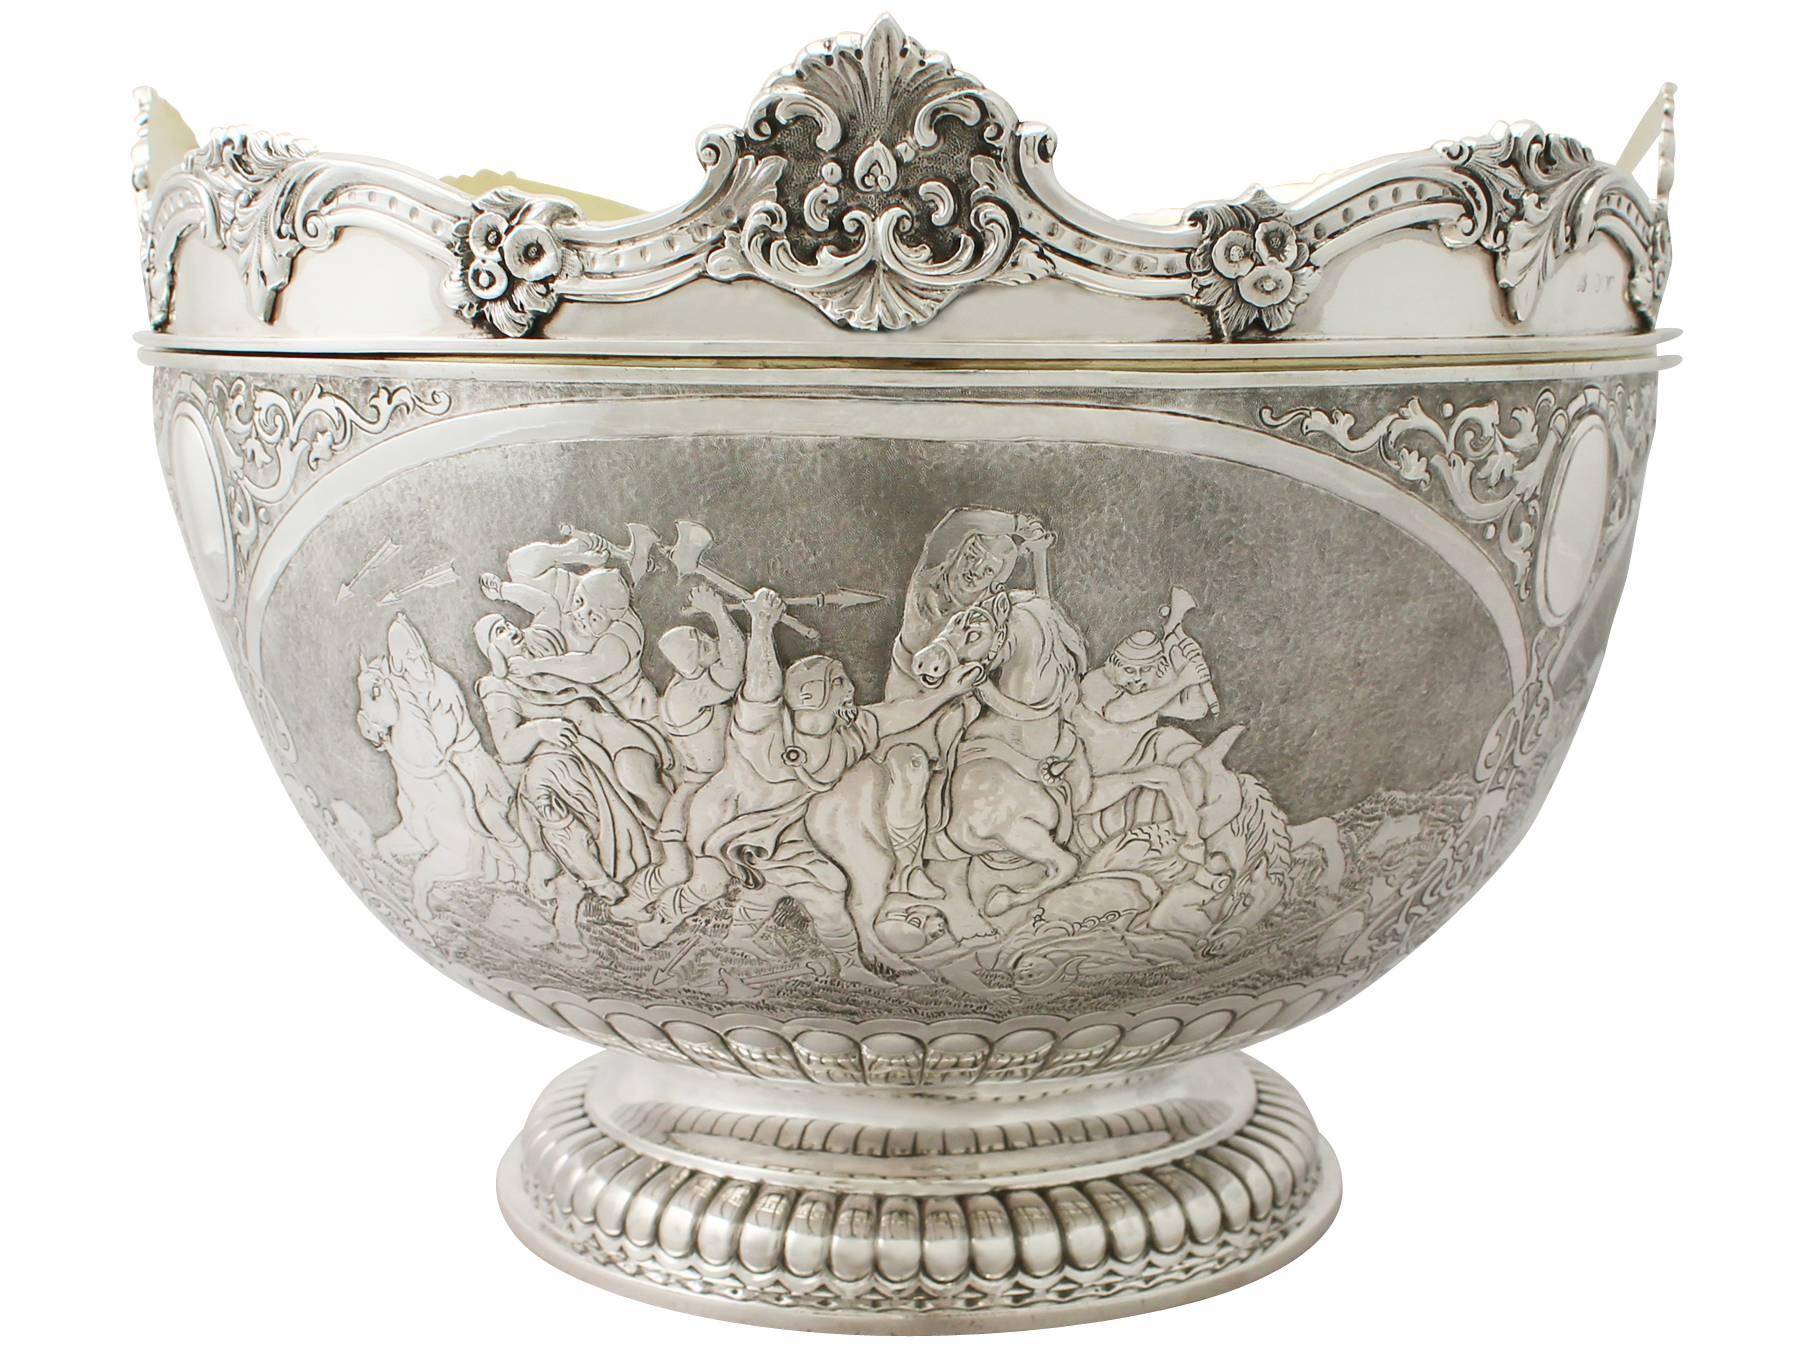 A magnificent, fine and impressive, large antique Victorian English sterling silver Monteith bowl, an addition to our range of collectable silverware.

This magnificent Victorian English sterling silver Monteith bowl has a large circular rounded